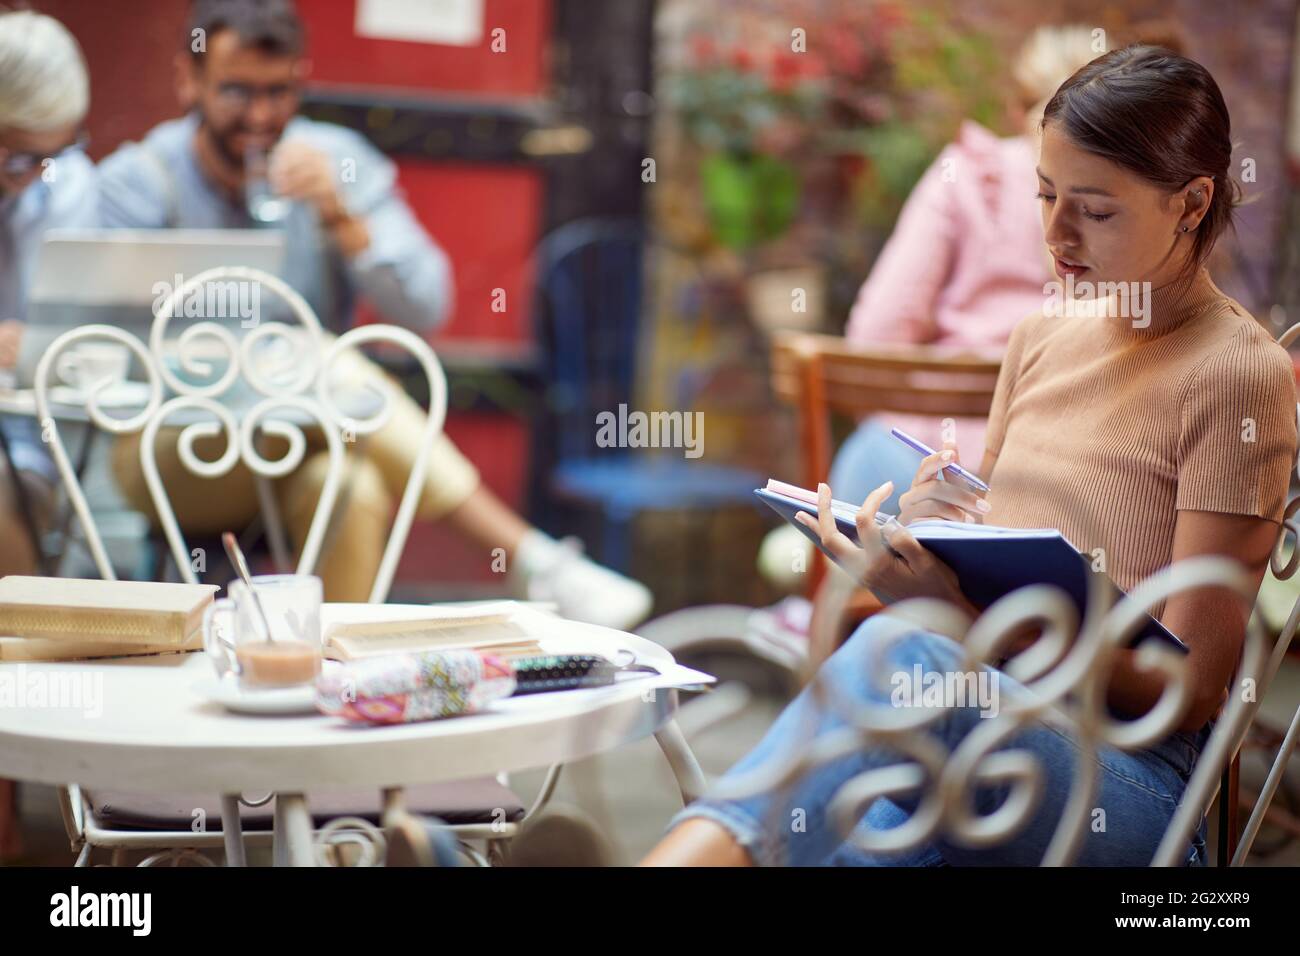 young adult caucasian female sitting in outdoor cafe reading a book alone, with other people in the background. Stock Photo